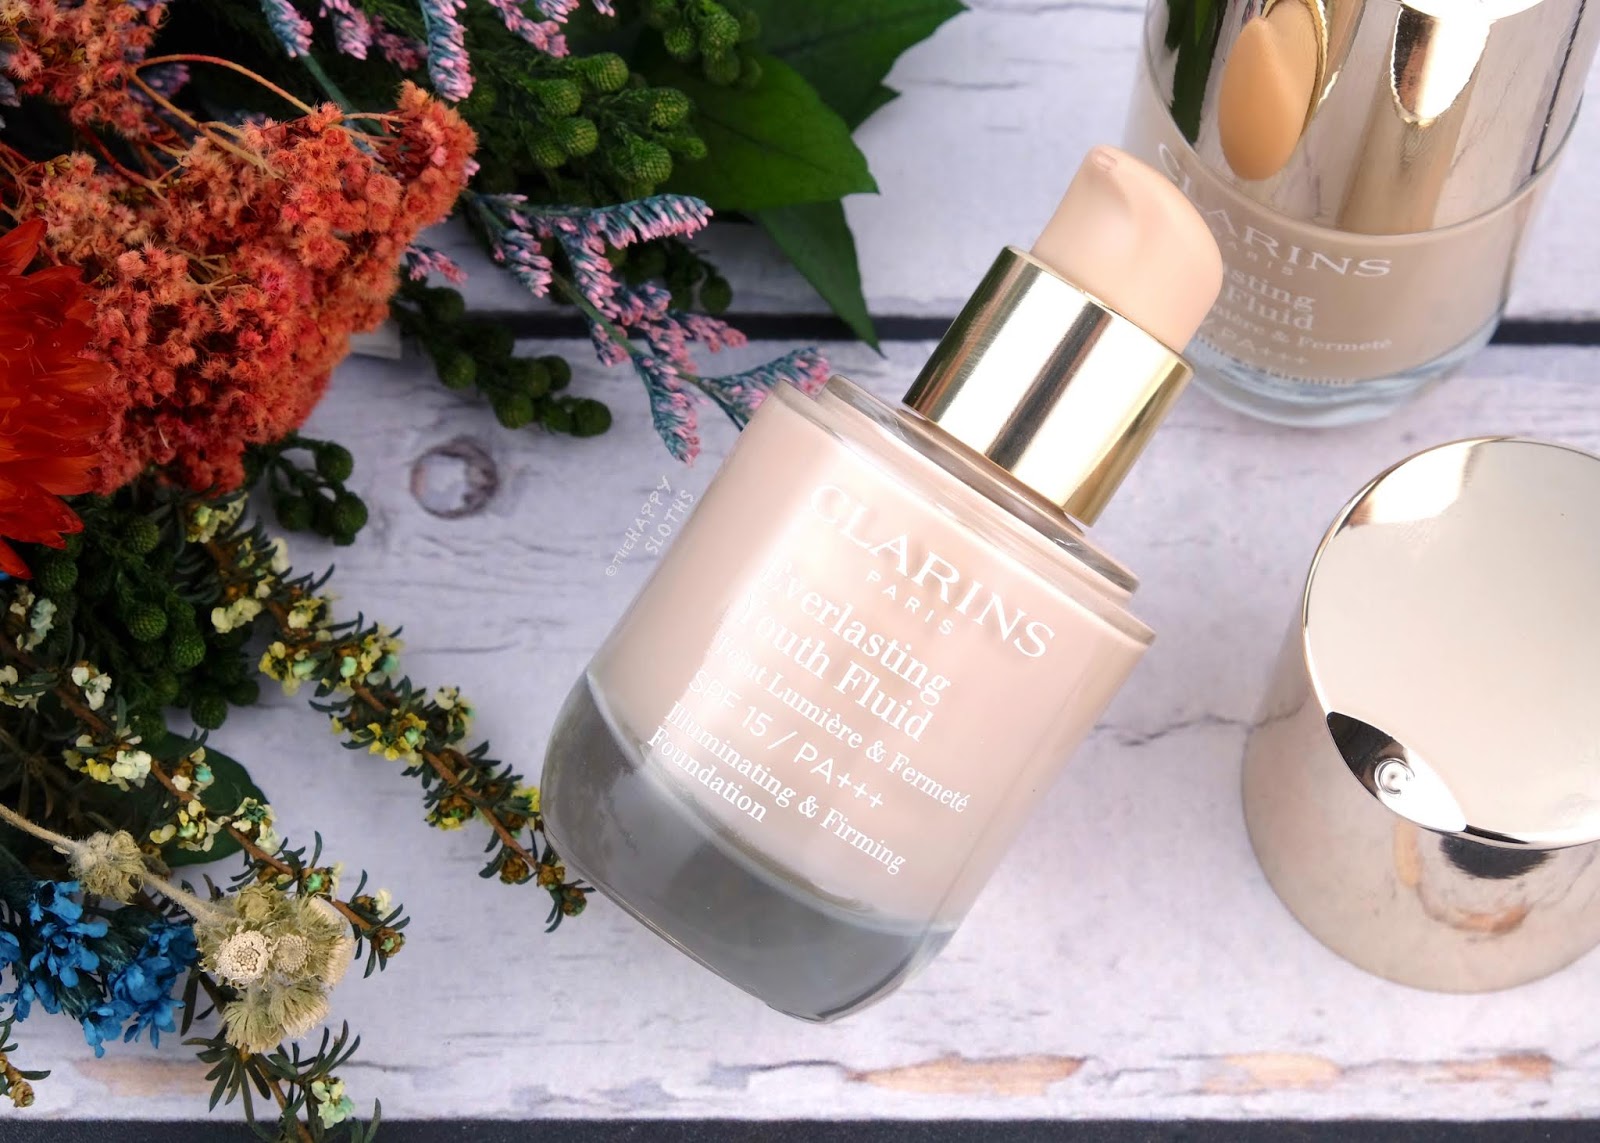 Clarins | Everlasting Youth Fluid Illuminating & Firming Foundation: Review and Swatches